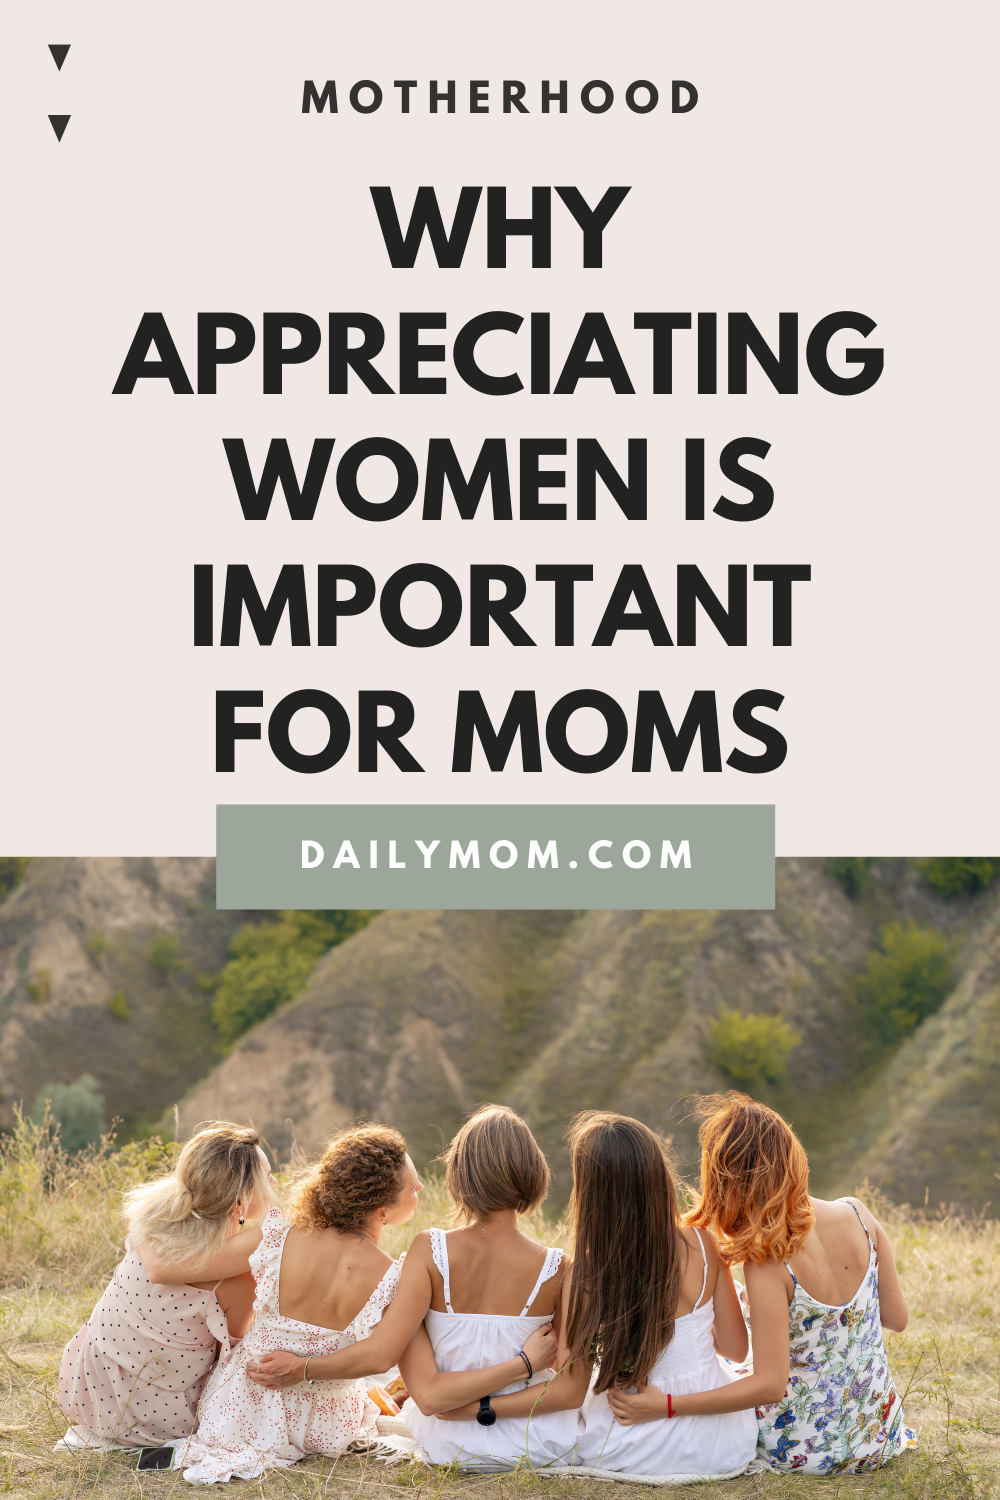 Why Appreciating Extraordinary Women Is Good For Moms 1 Daily Mom, Magazine For Families